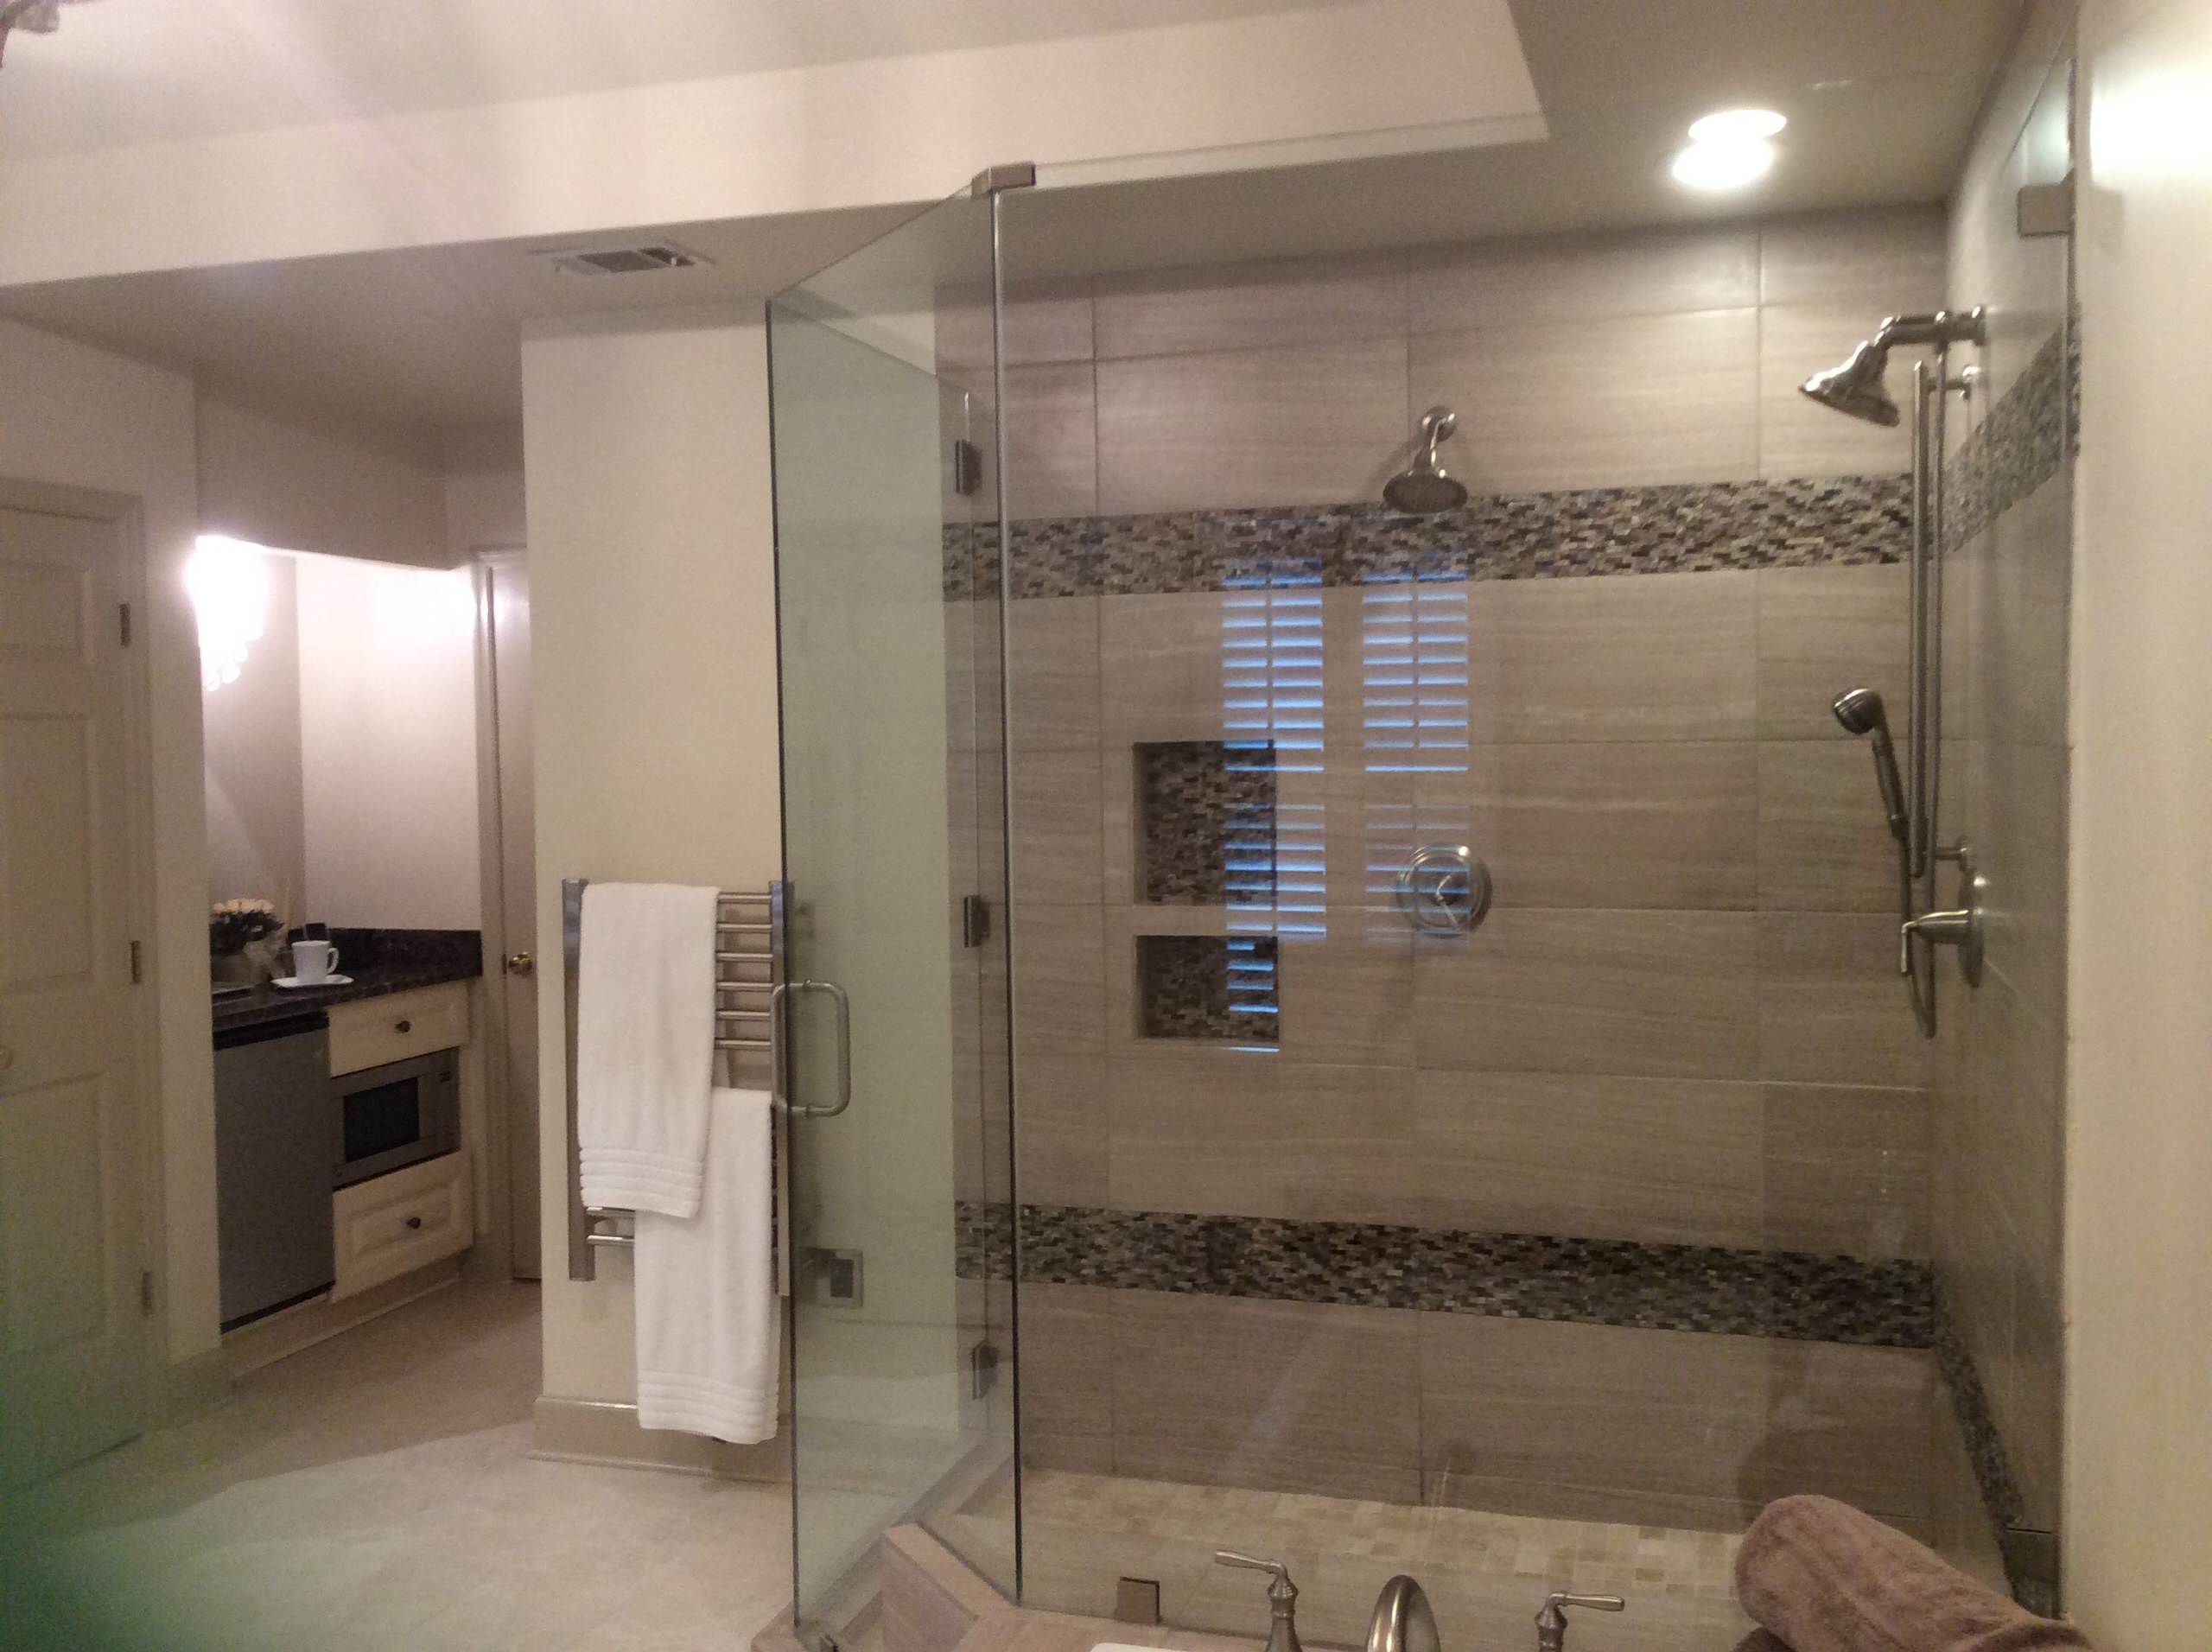 Transitional master bath with morning kitchen